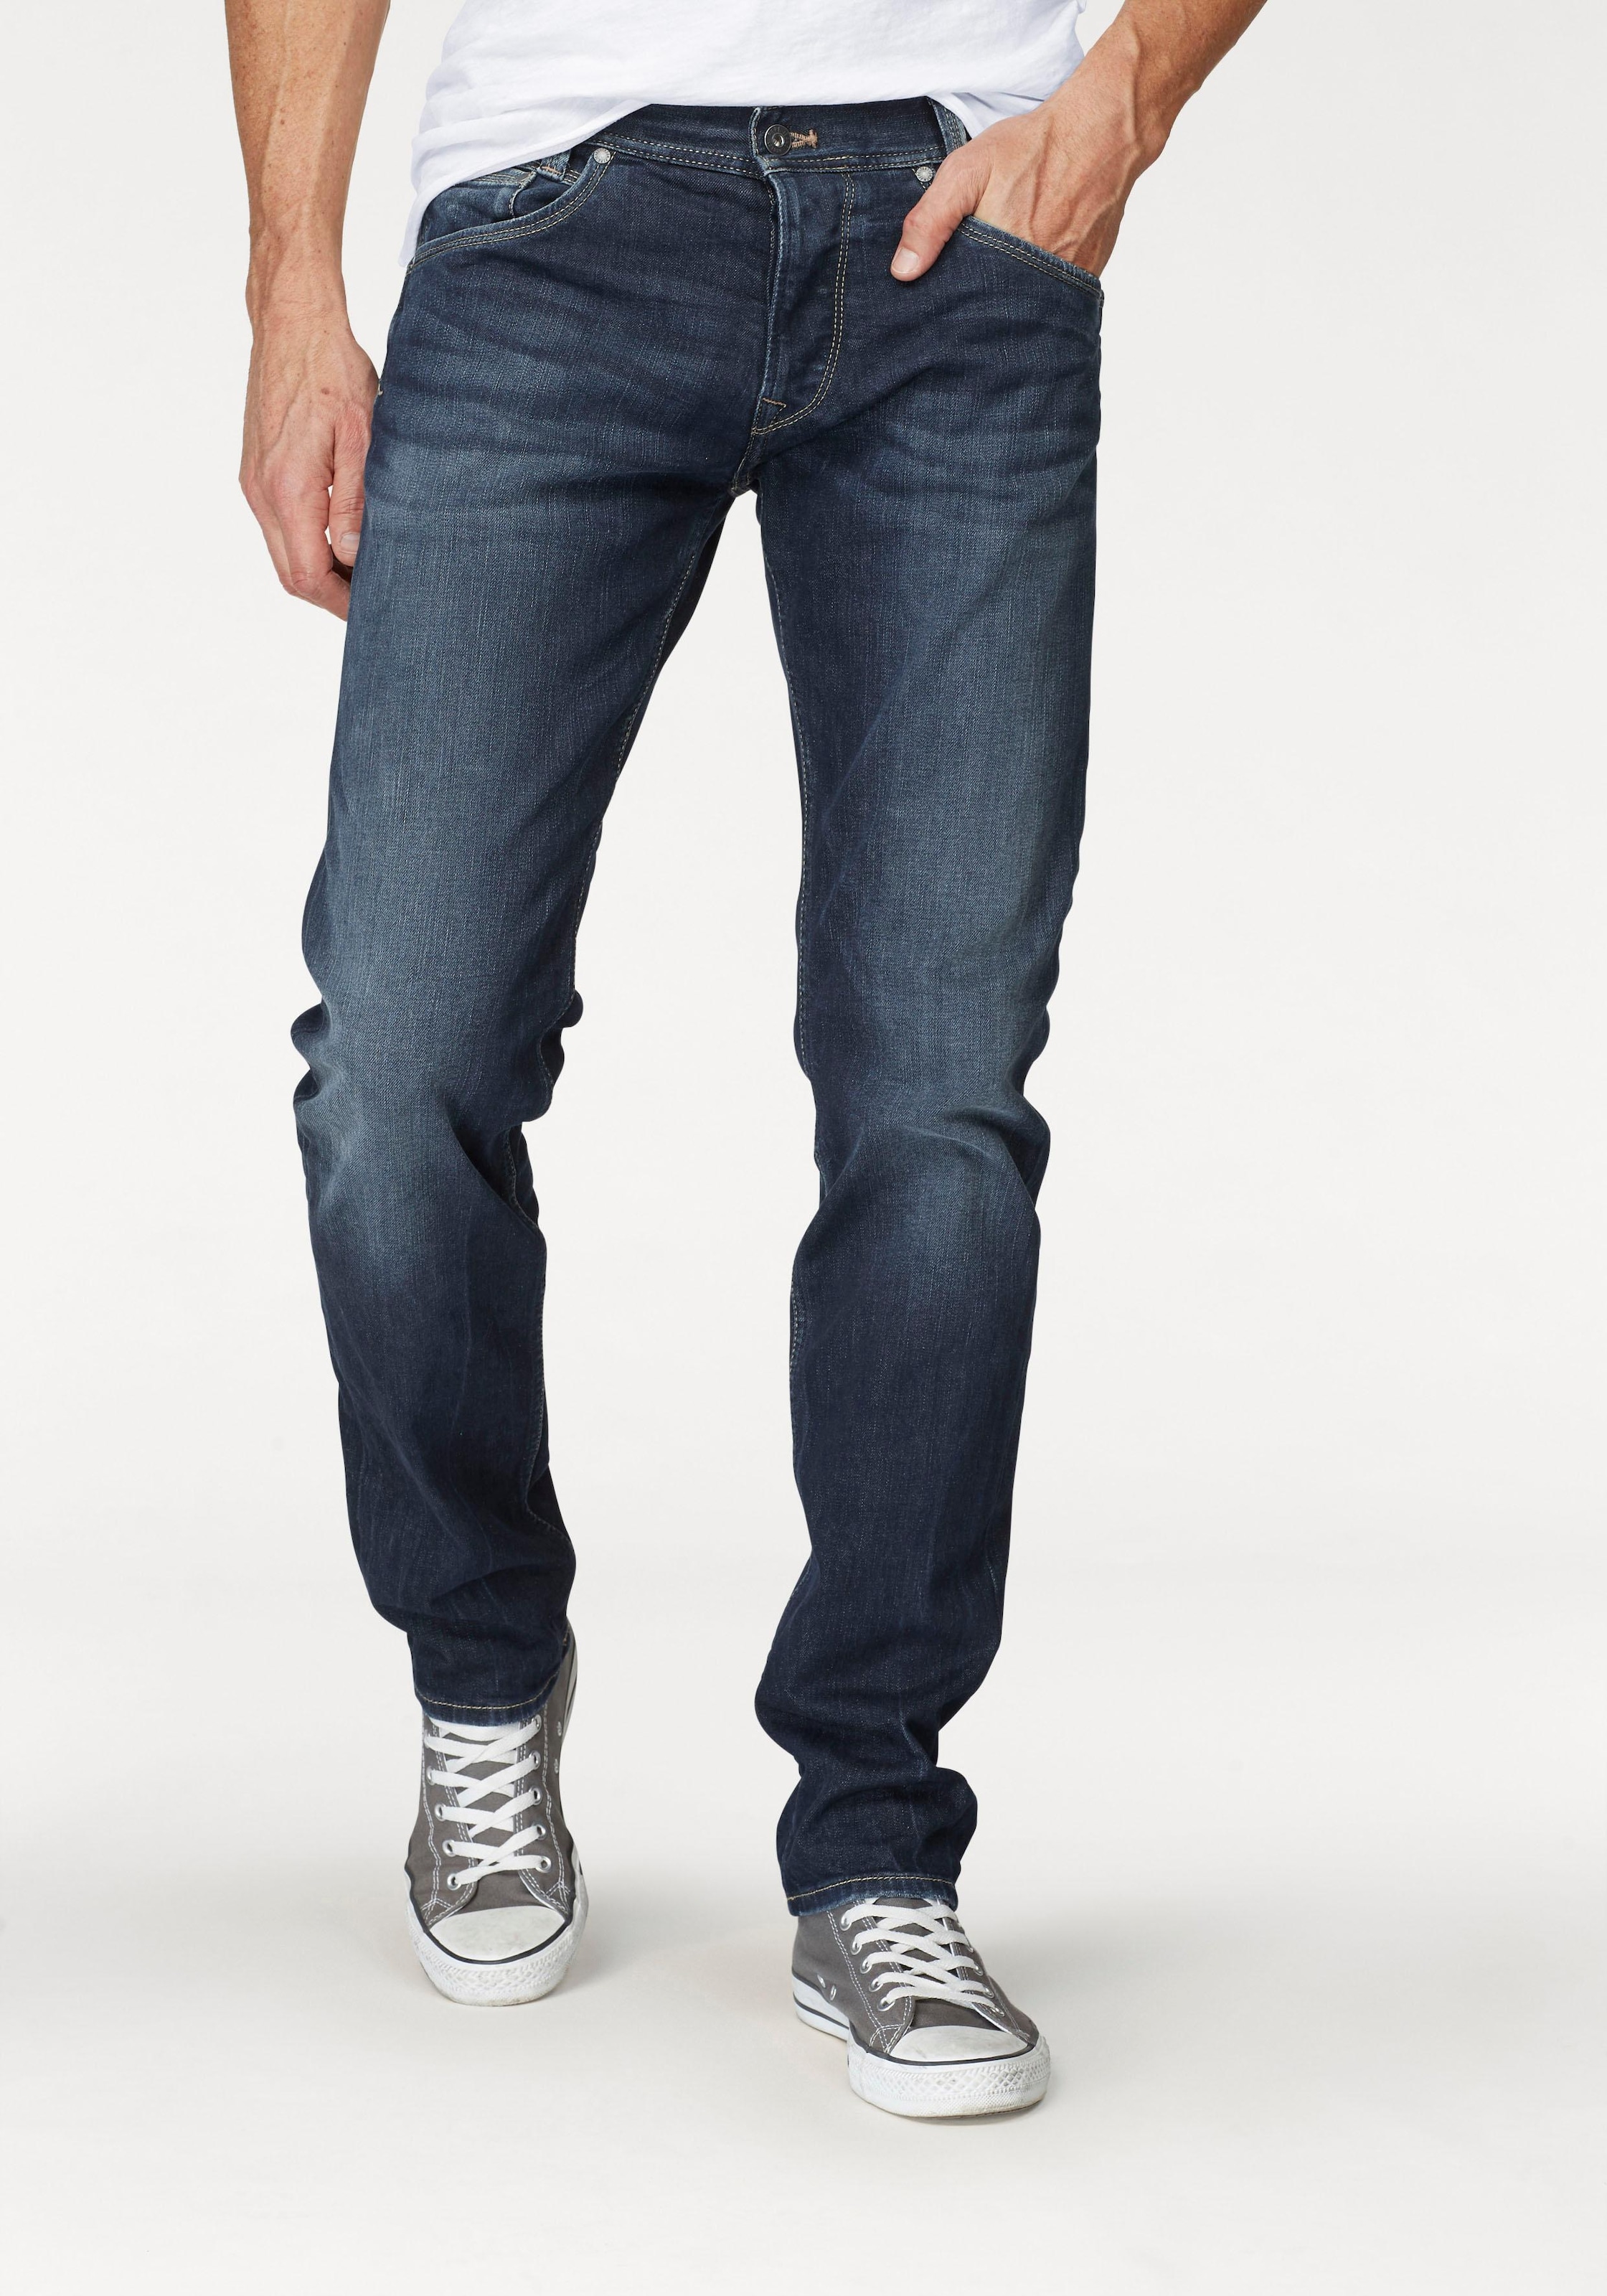 Pepe »SPIKE« kaufen online Stretch-Jeans Jeans